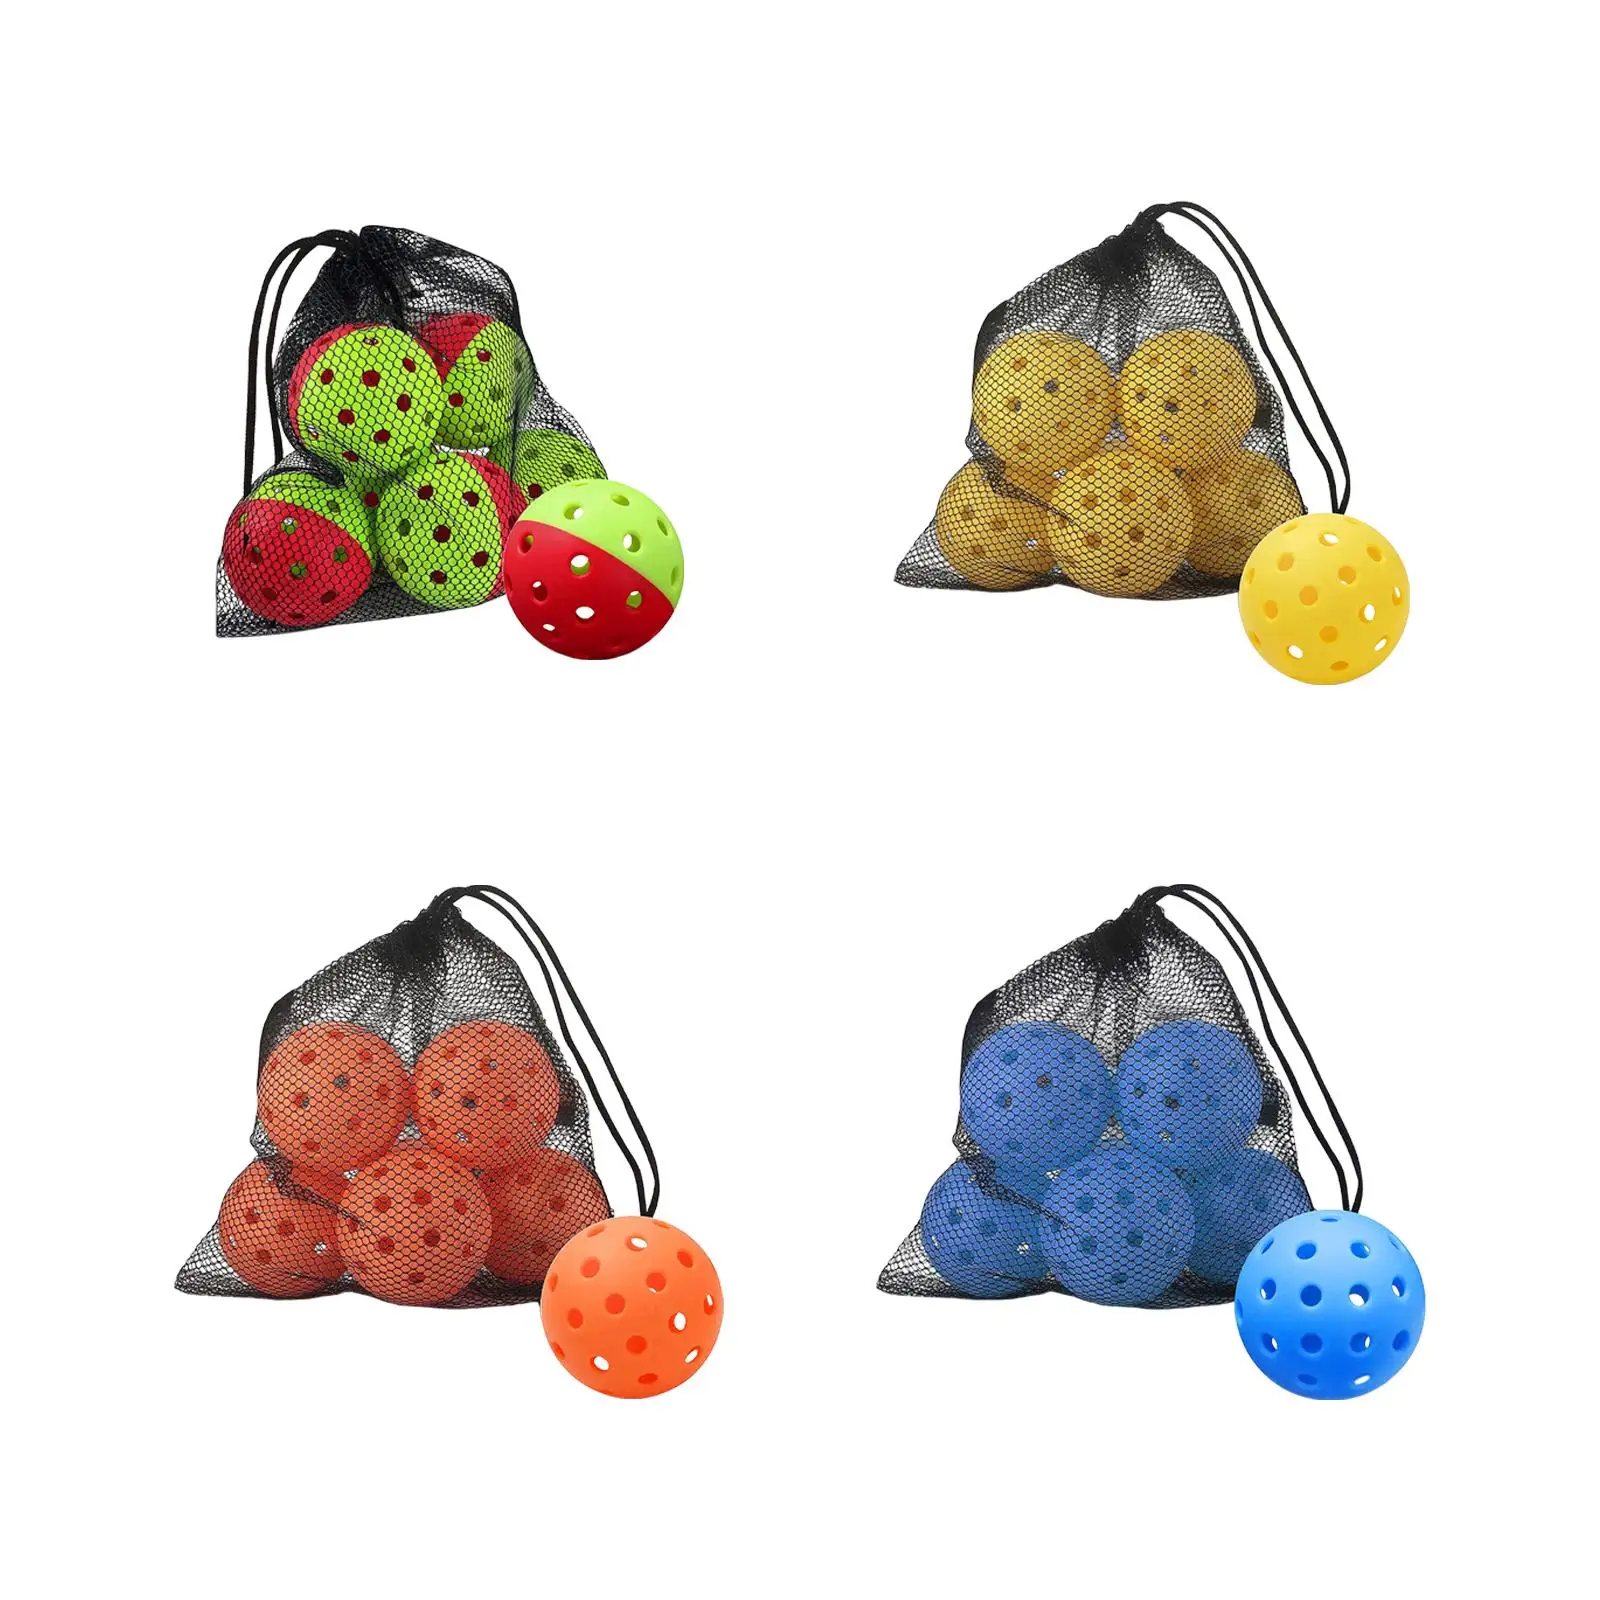 

6x Pickleball Balls 74mm with Mesh Bag Sports Pickle Balls for Indoor and Outdoor Tournament Play Tennis/Wood/concrete Courts